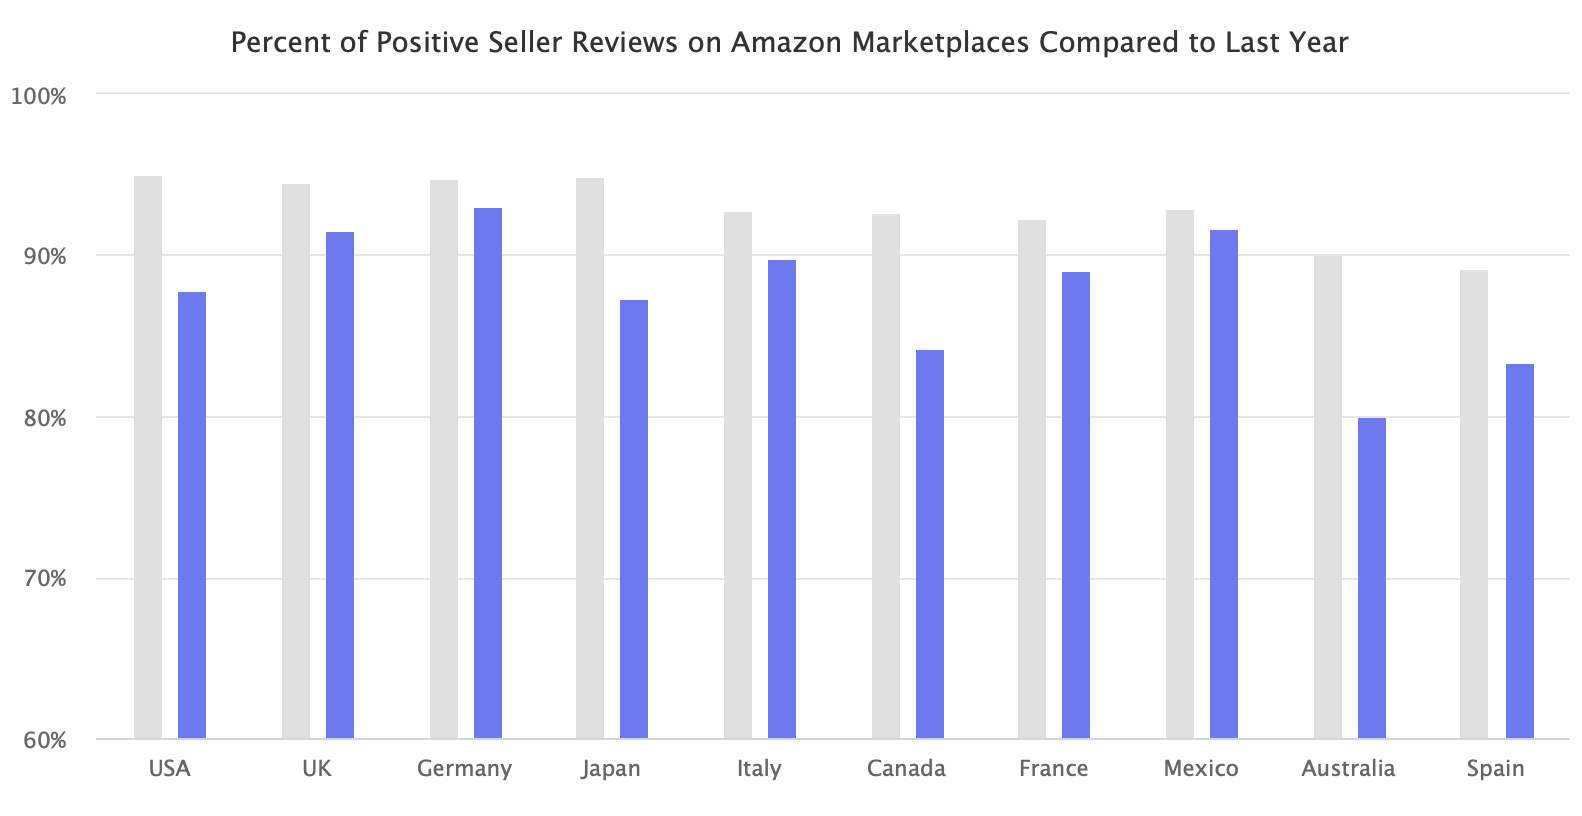 Percent of Positive Seller Reviews on Amazon Marketplaces Compared to Last Year